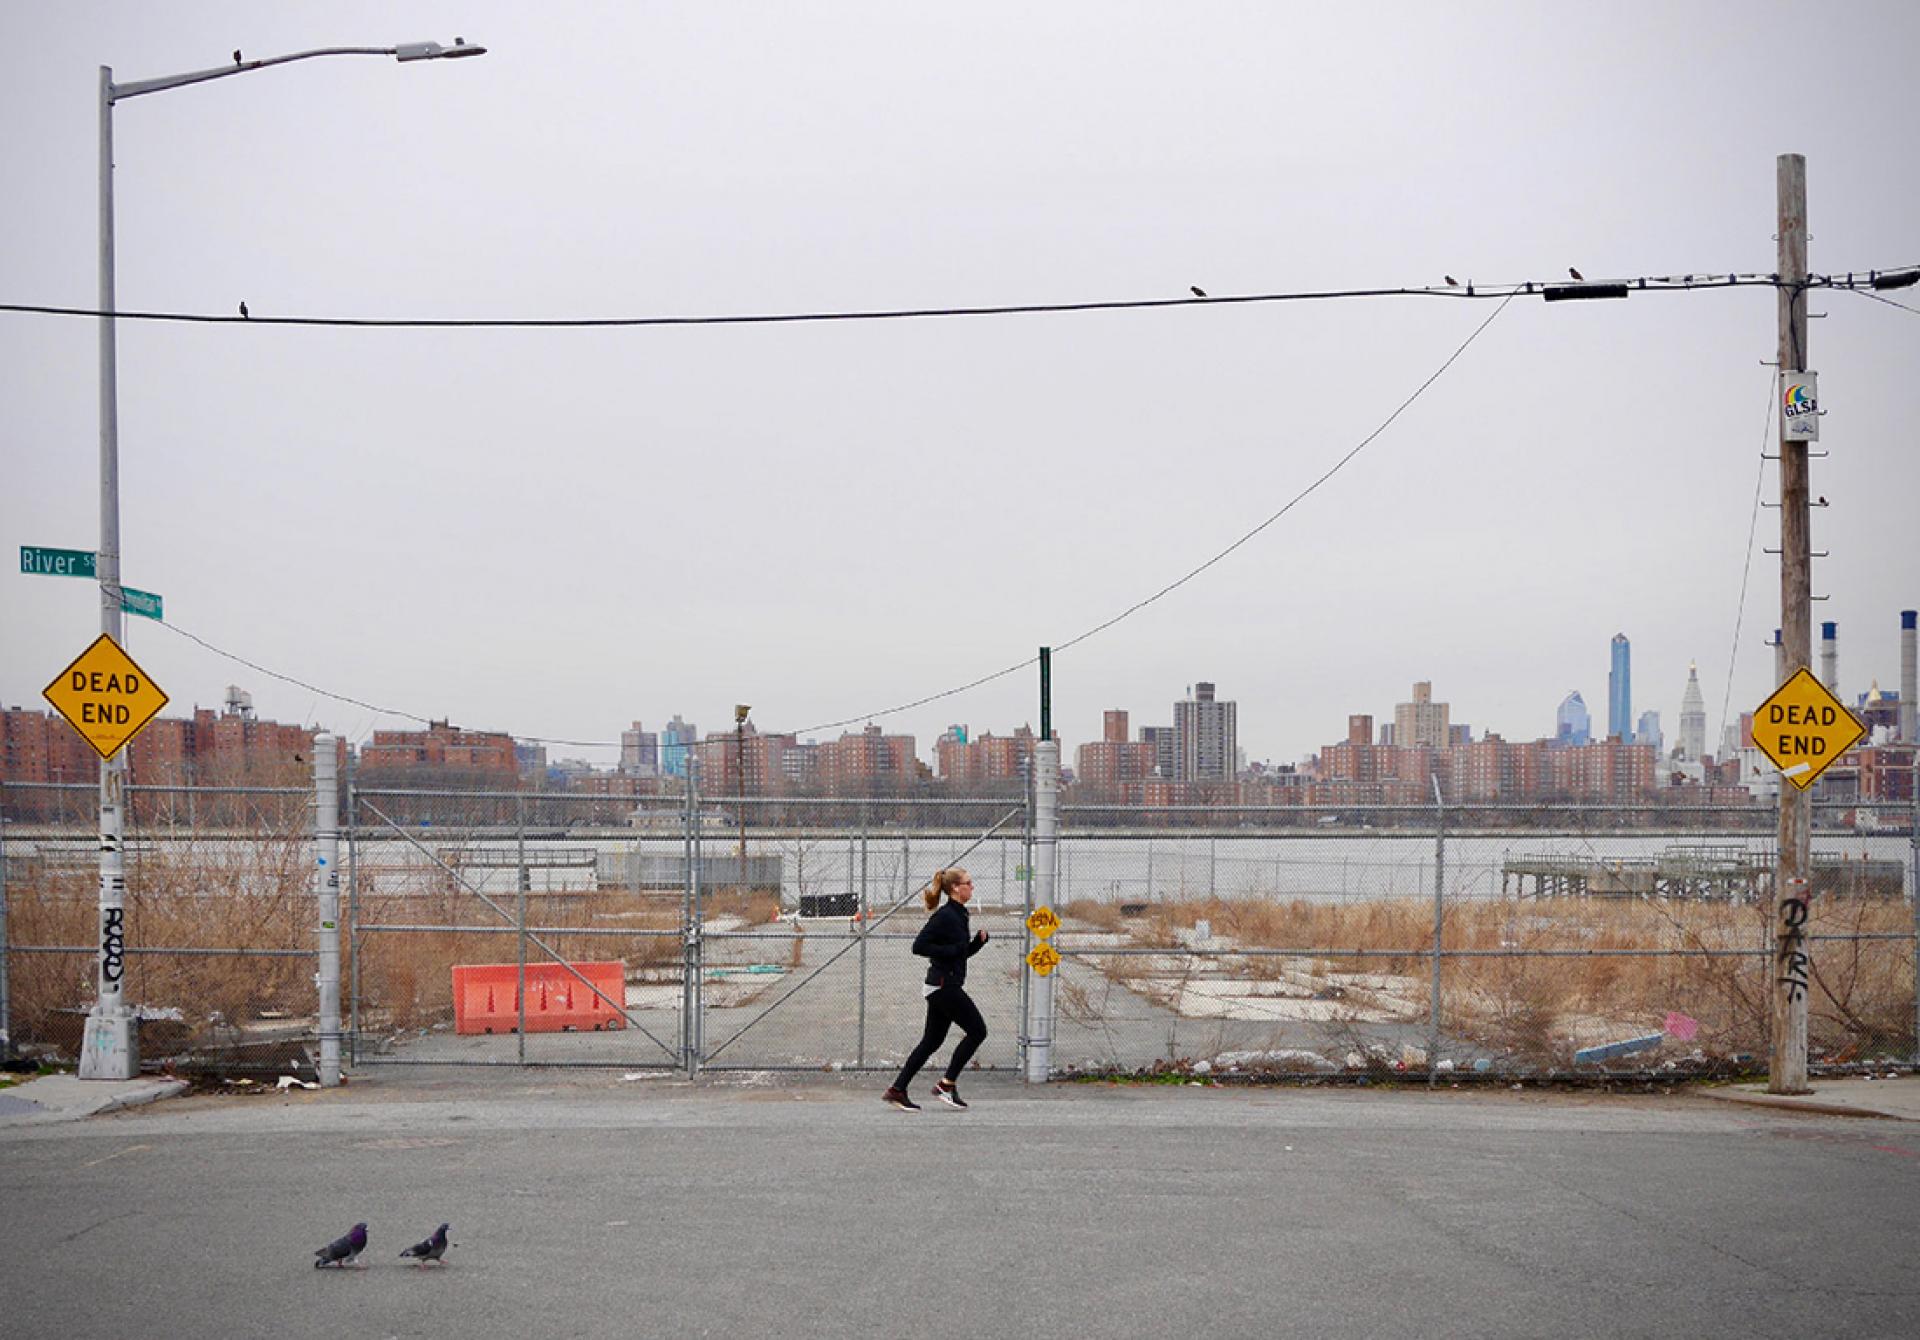 New York Photography Awards Winner - SOMETHING COMES FROM RIVER STREET